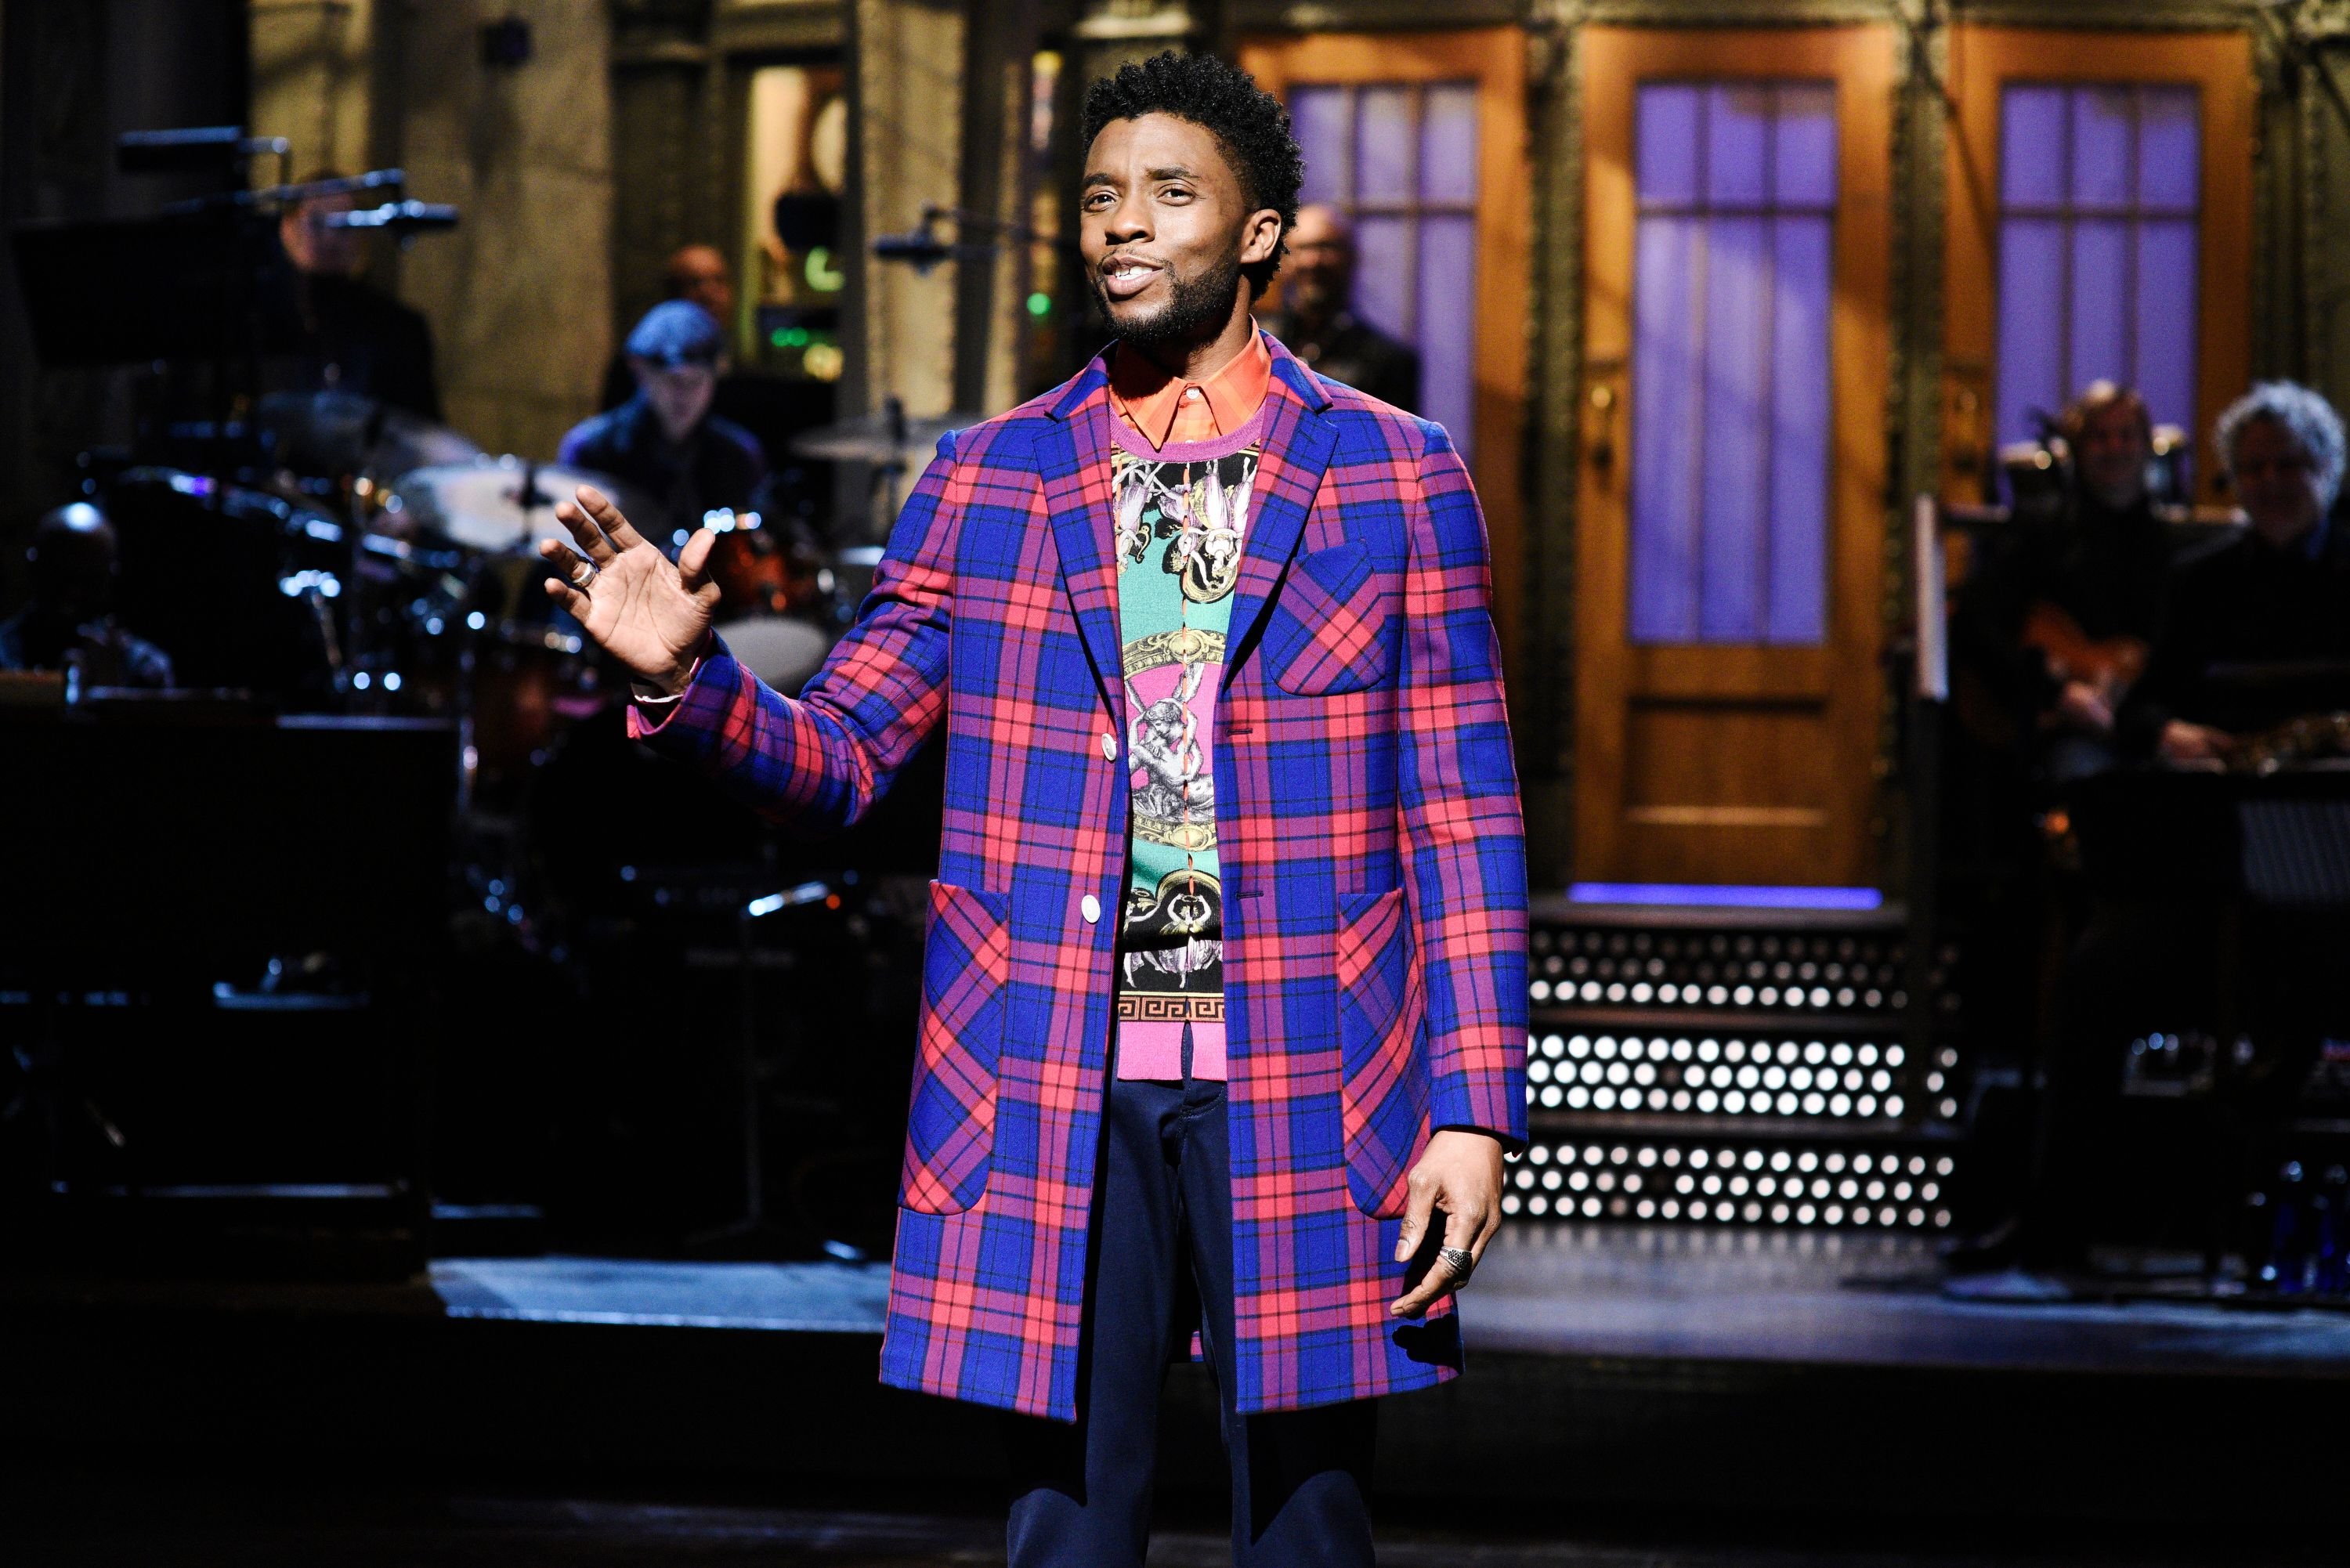 "Black Panther" actor Chadwick Boseman hosting episode 1742 of "Saturday Night Live" Opening Monologue | Photo: Will Heath/NBCU Photo Bank/NBCUniversal via Getty Images)